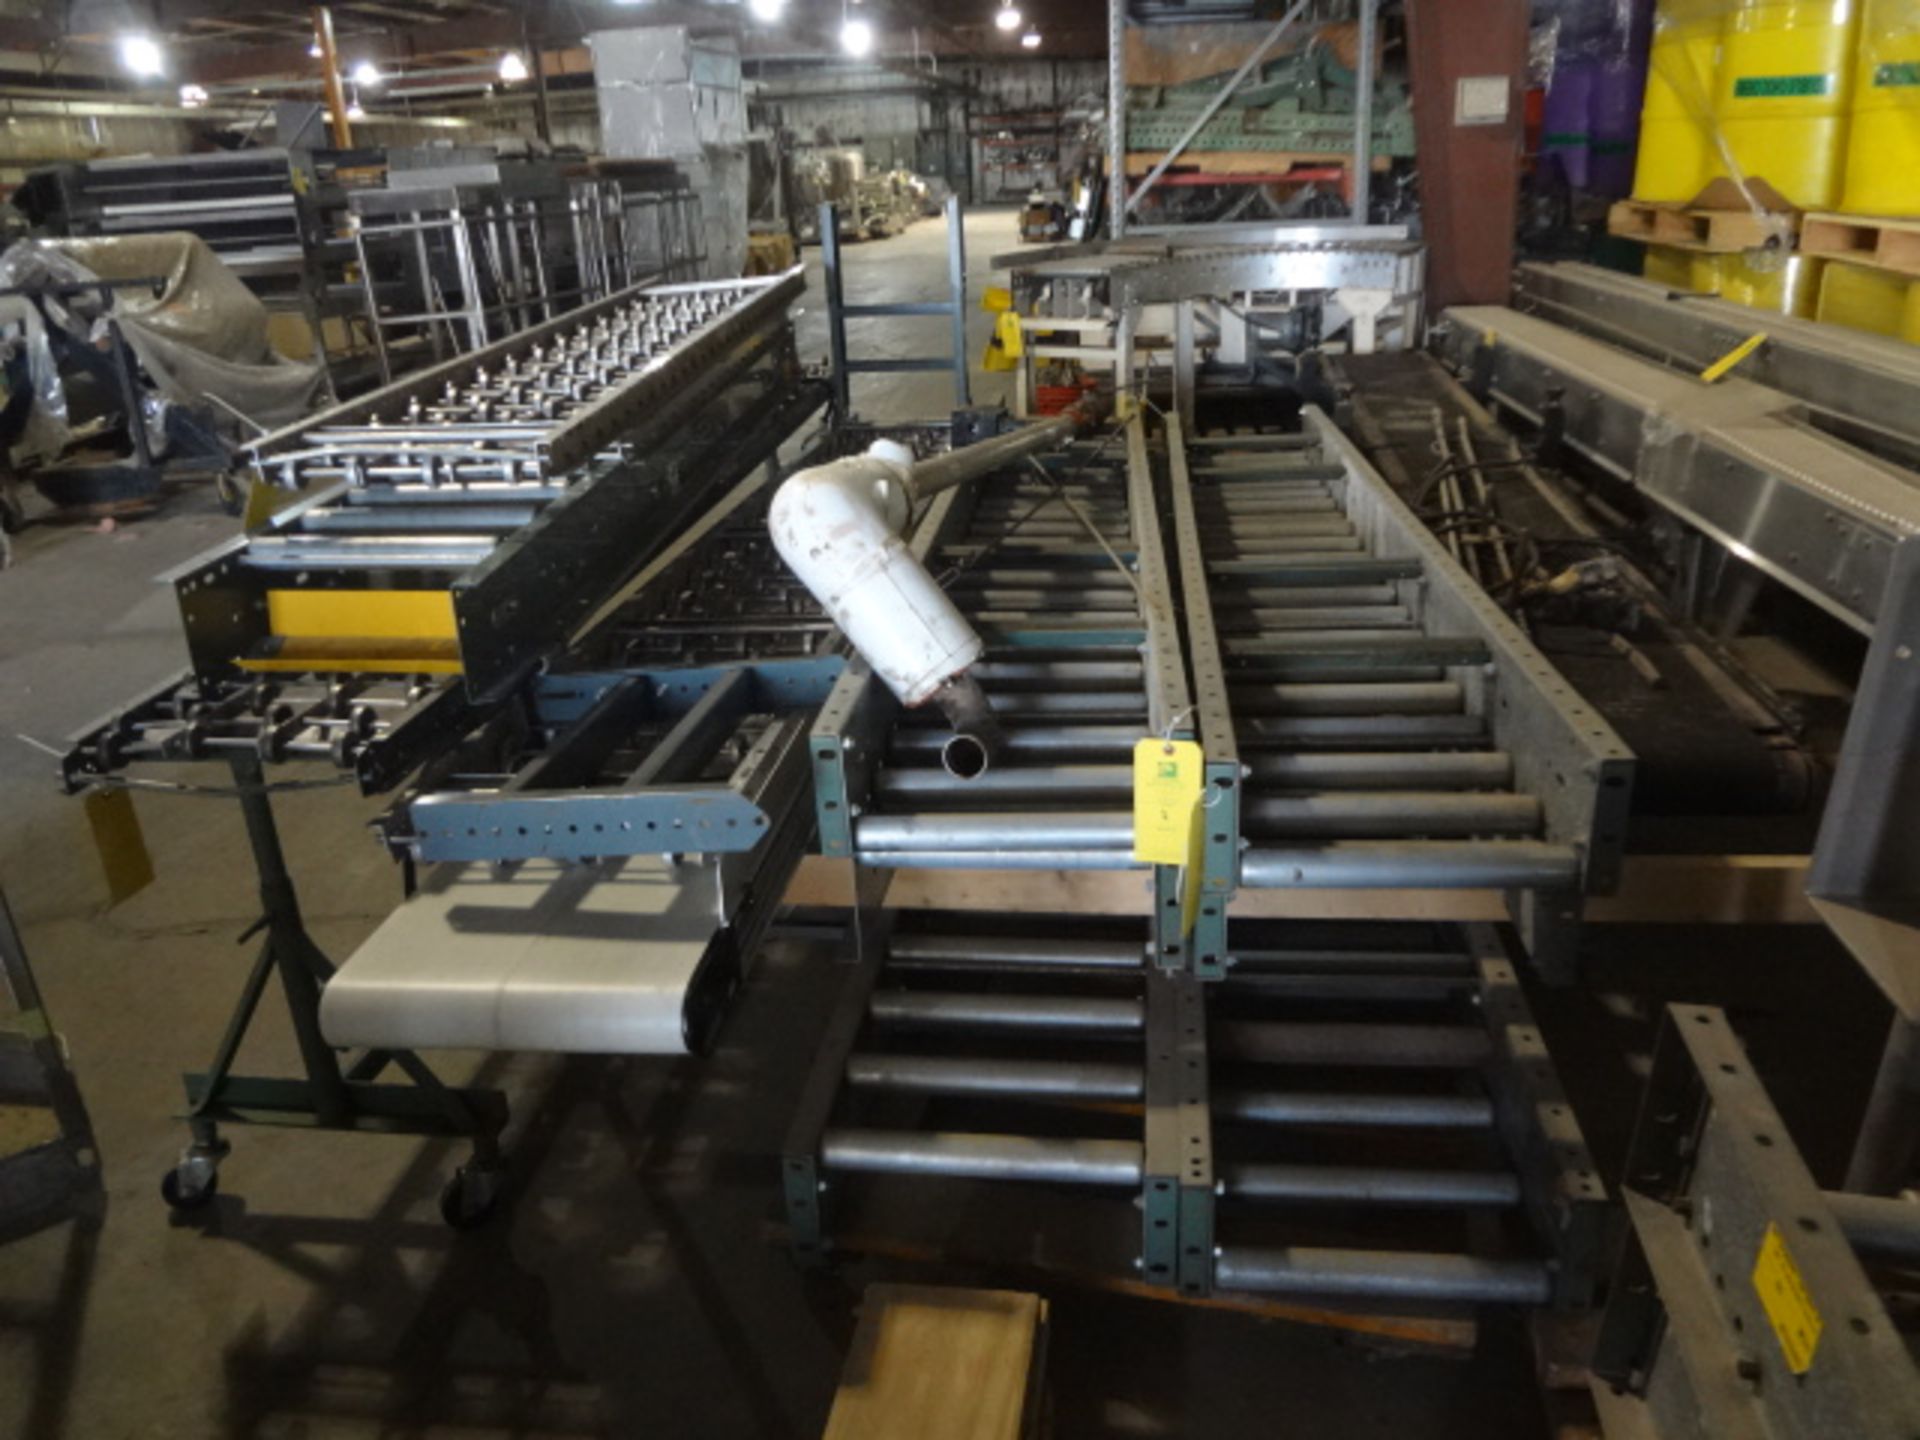 Qty. (10) Hytrol Conveyors Powered Skate Conveyors, One Pallet of Legs, LOCATED IN WENONA, IL, LOADI